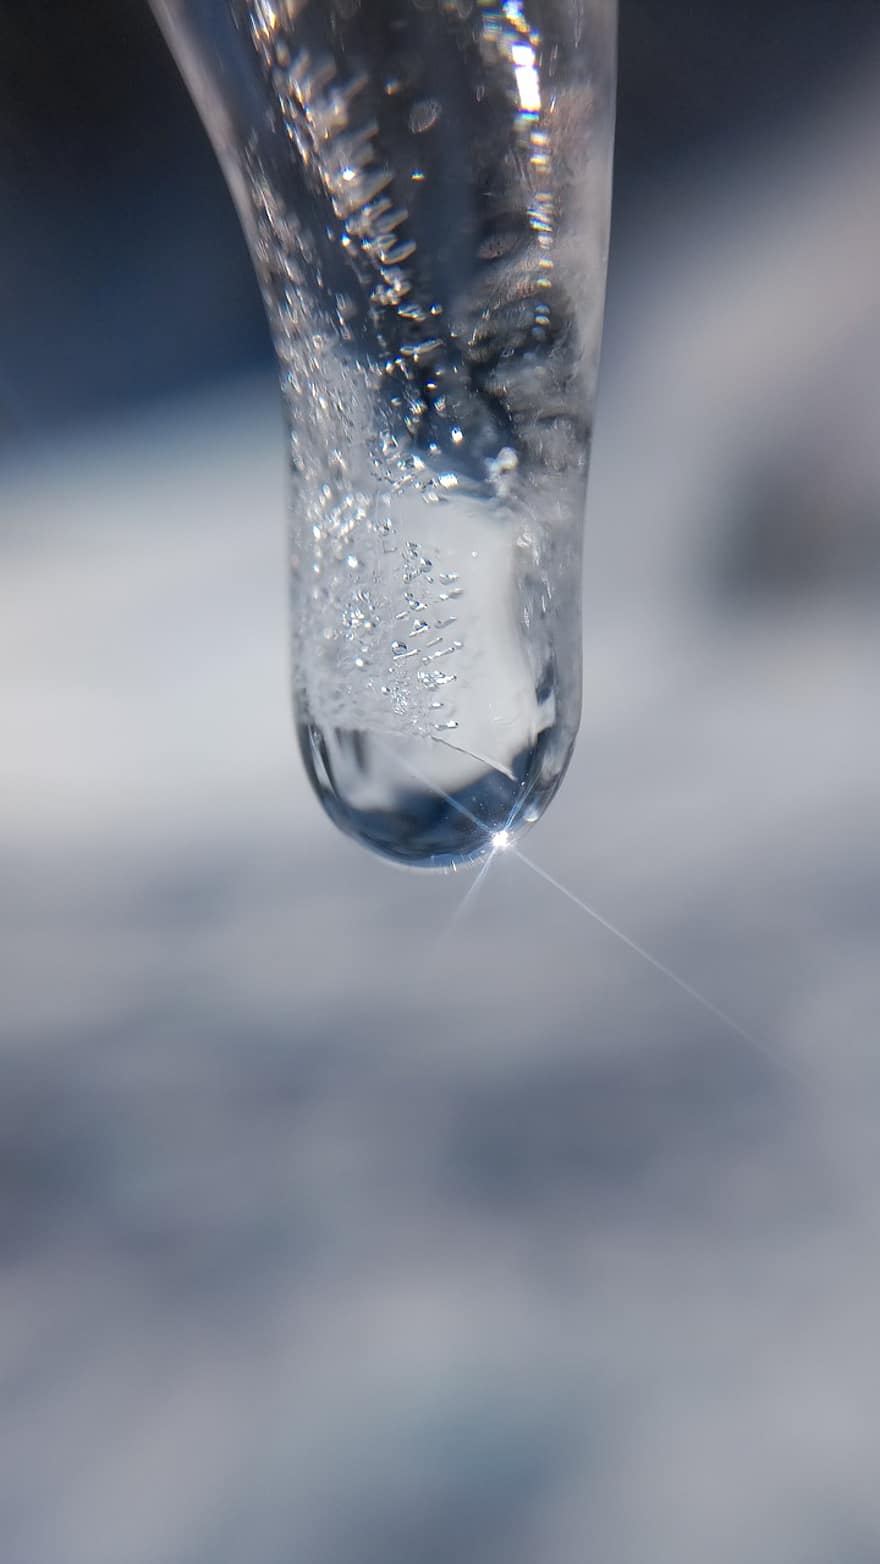 Ice, Icicle, Water Droplet, Frost, Melting, Water, Winter, Frozen, Cold, blue, liquid